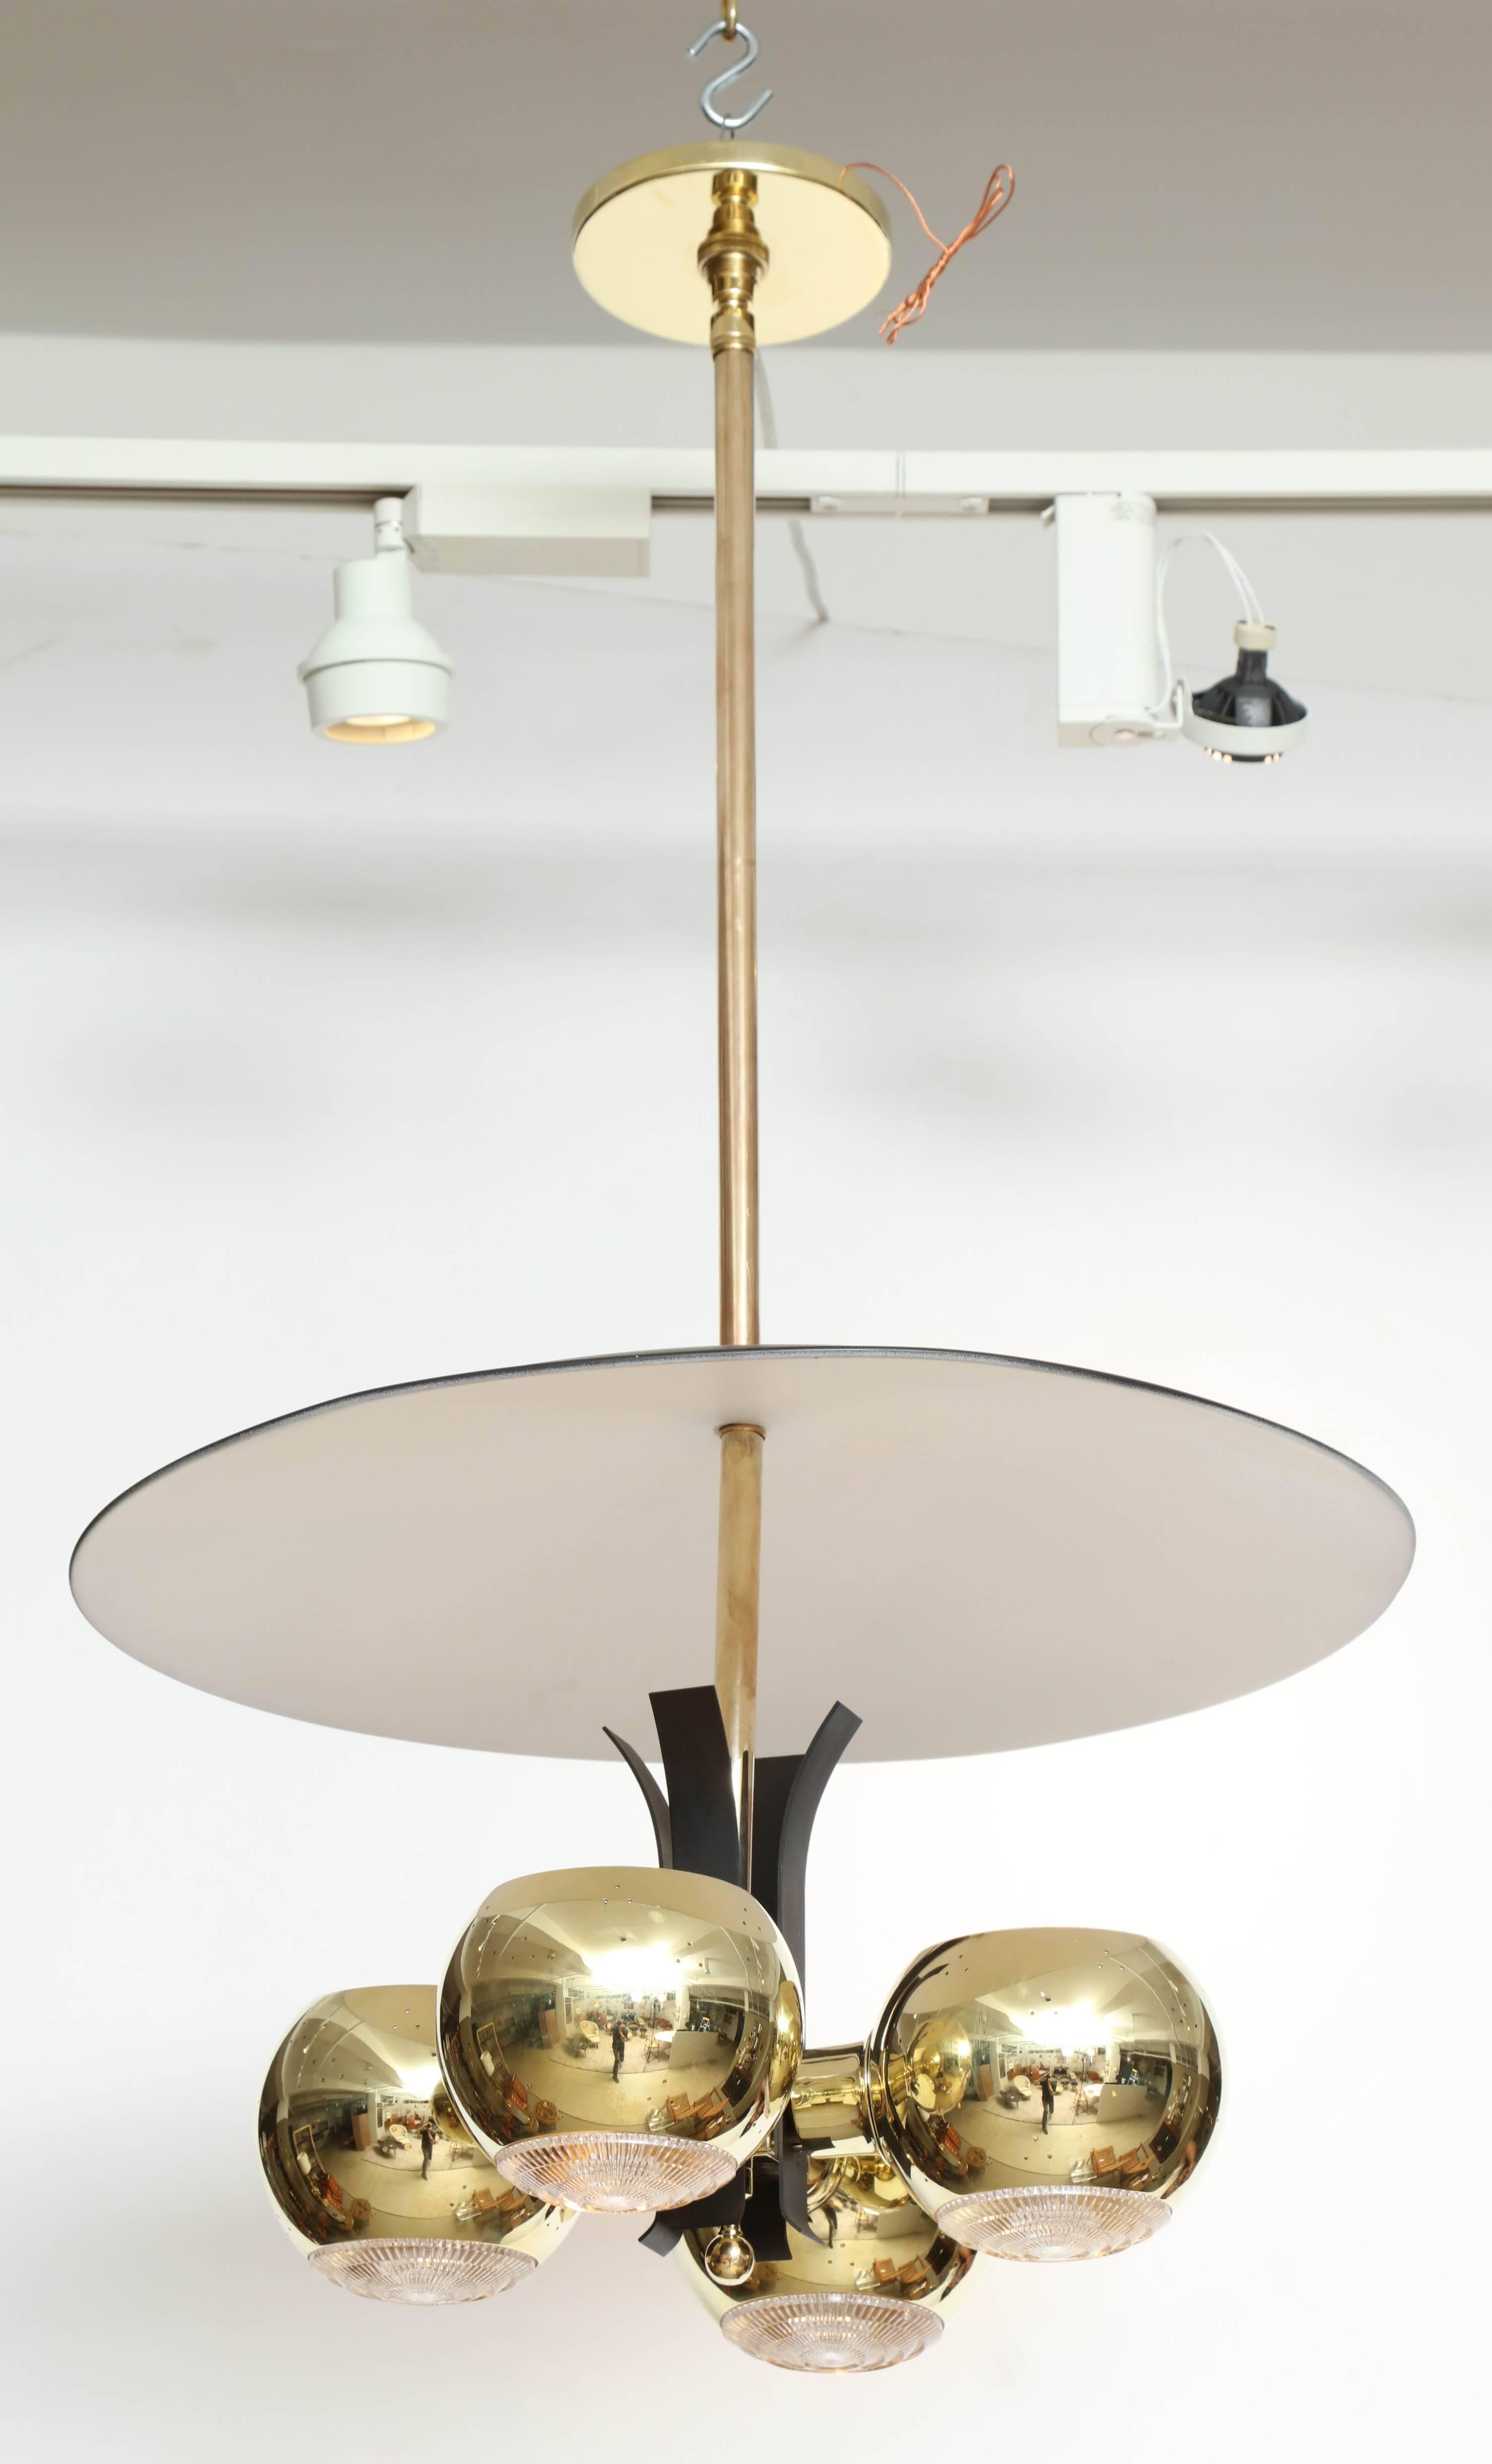 Four spheres of polished brass focus light upward to reflect from a white-painted shade and downwards through glass diffusers. The four lights create a four petaled flower pattern on the reflector when illuminated. By Stilnovo, Italy, 1950s. Newly